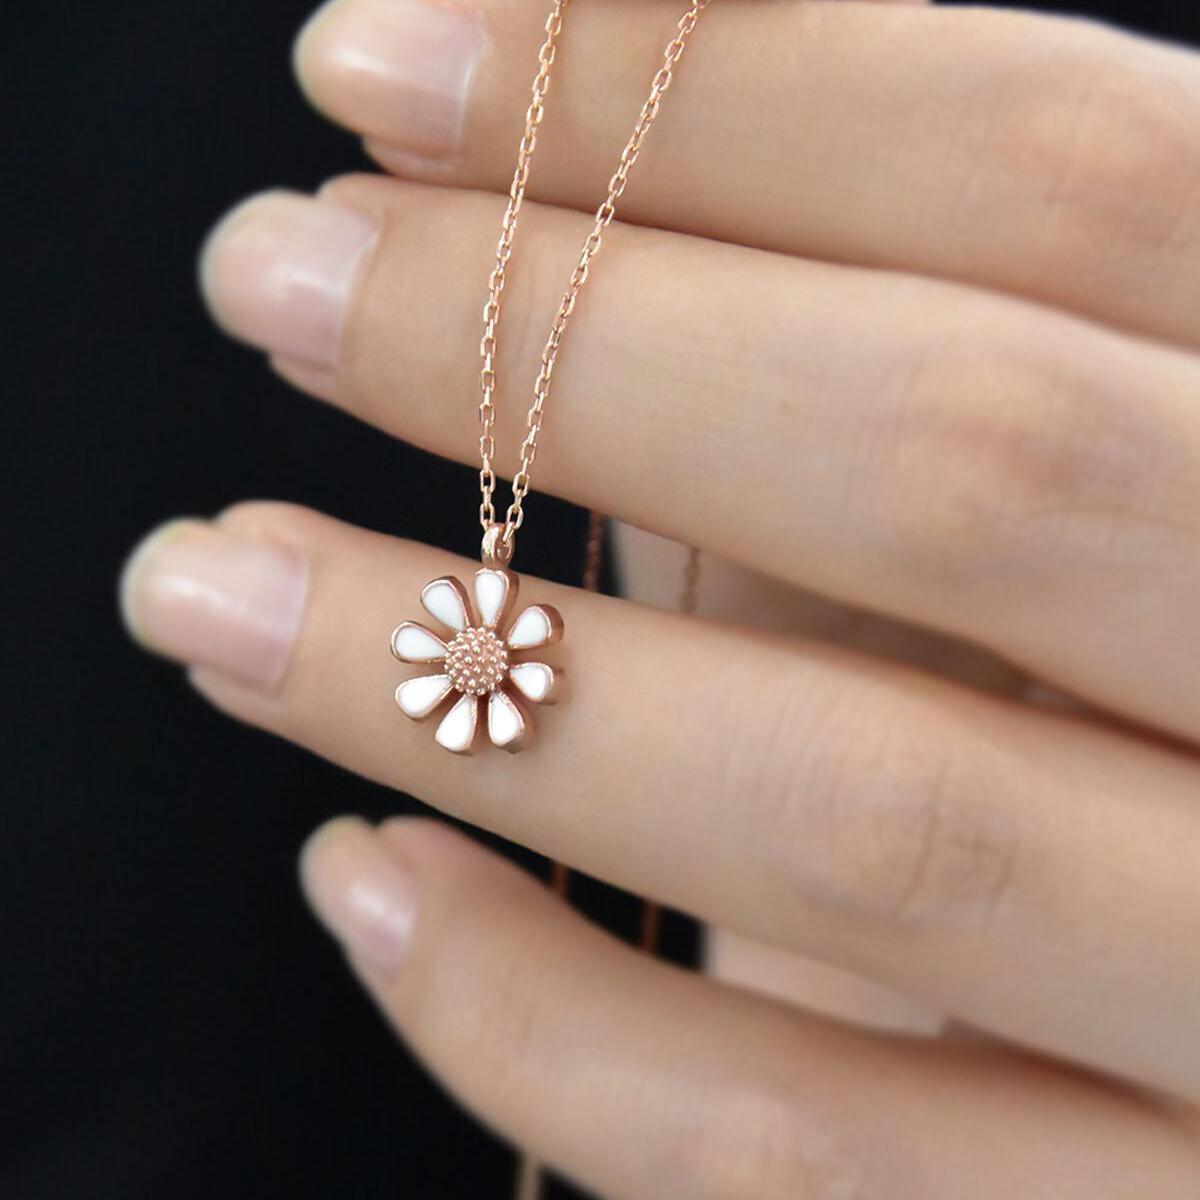 Daisy Flower Necklace • Daisy Pendant Necklace • Daisy Choker Necklace - Trending Silver Gifts